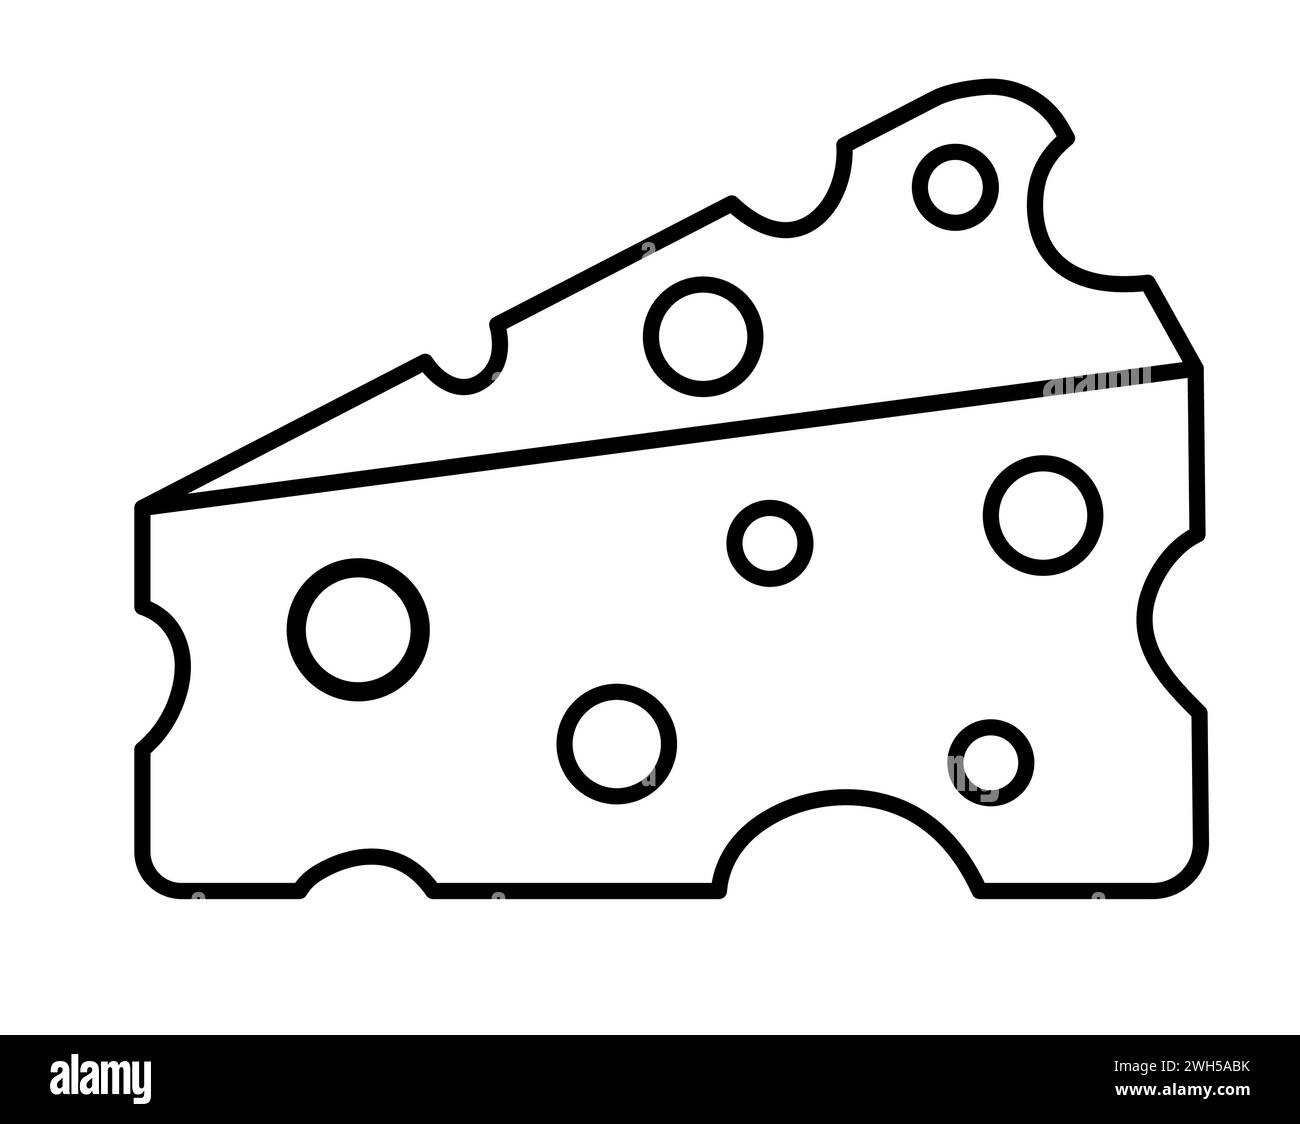 Cheese isolated on a white background. Hand drawn doodle, sketch monochrome style. Vector flat illustration. Stock Vector